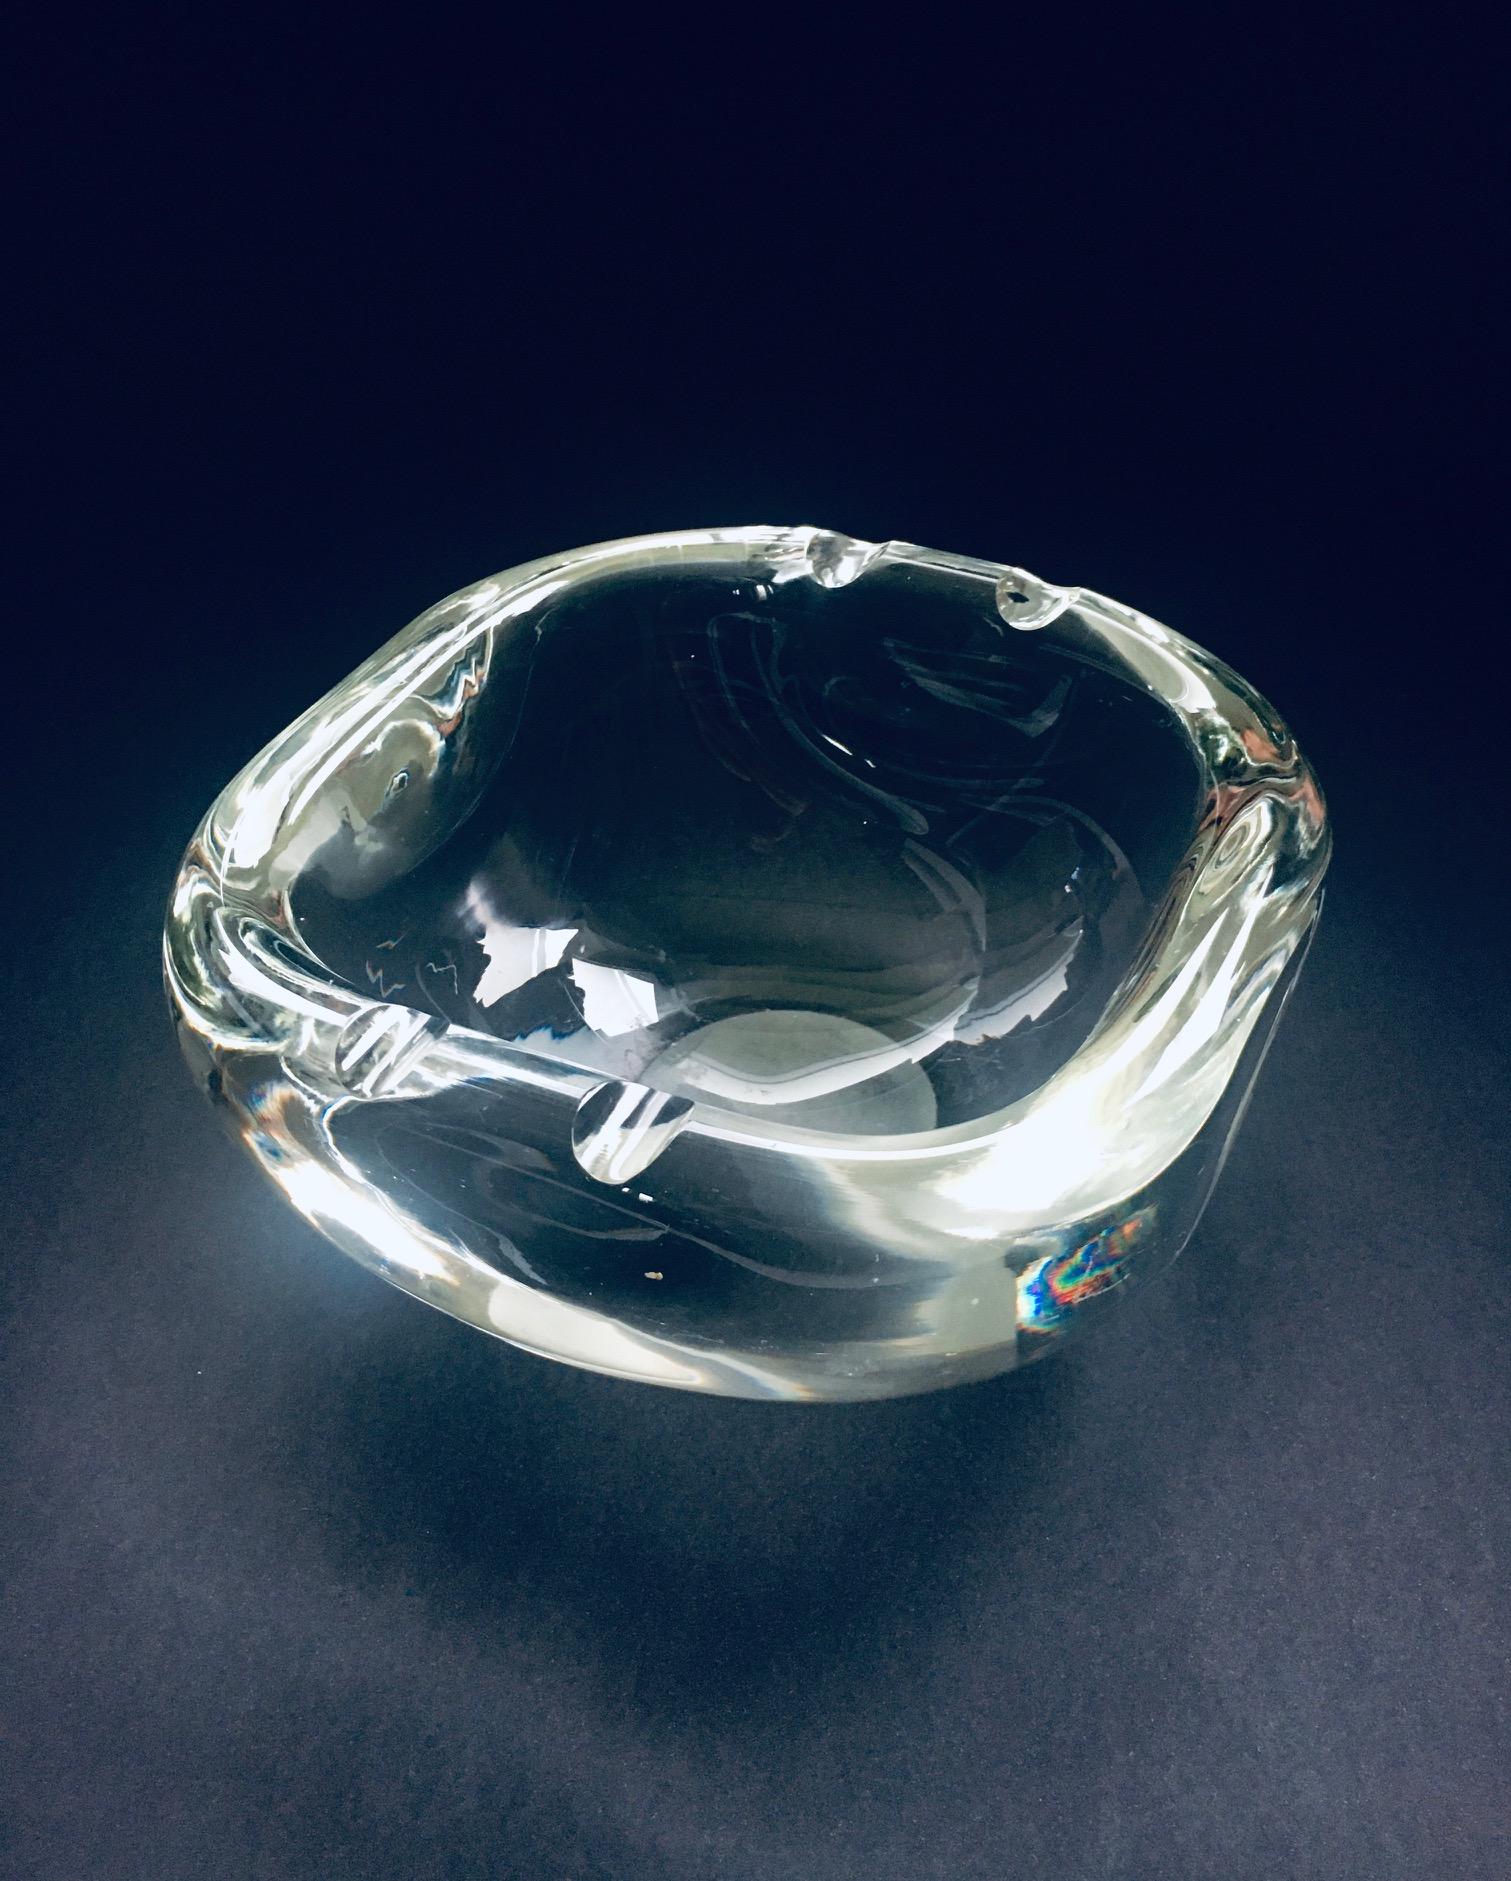 Vintage Art Glass Large Ashtray or Bowl by Barbini, Murano Italy 1960's For Sale 3